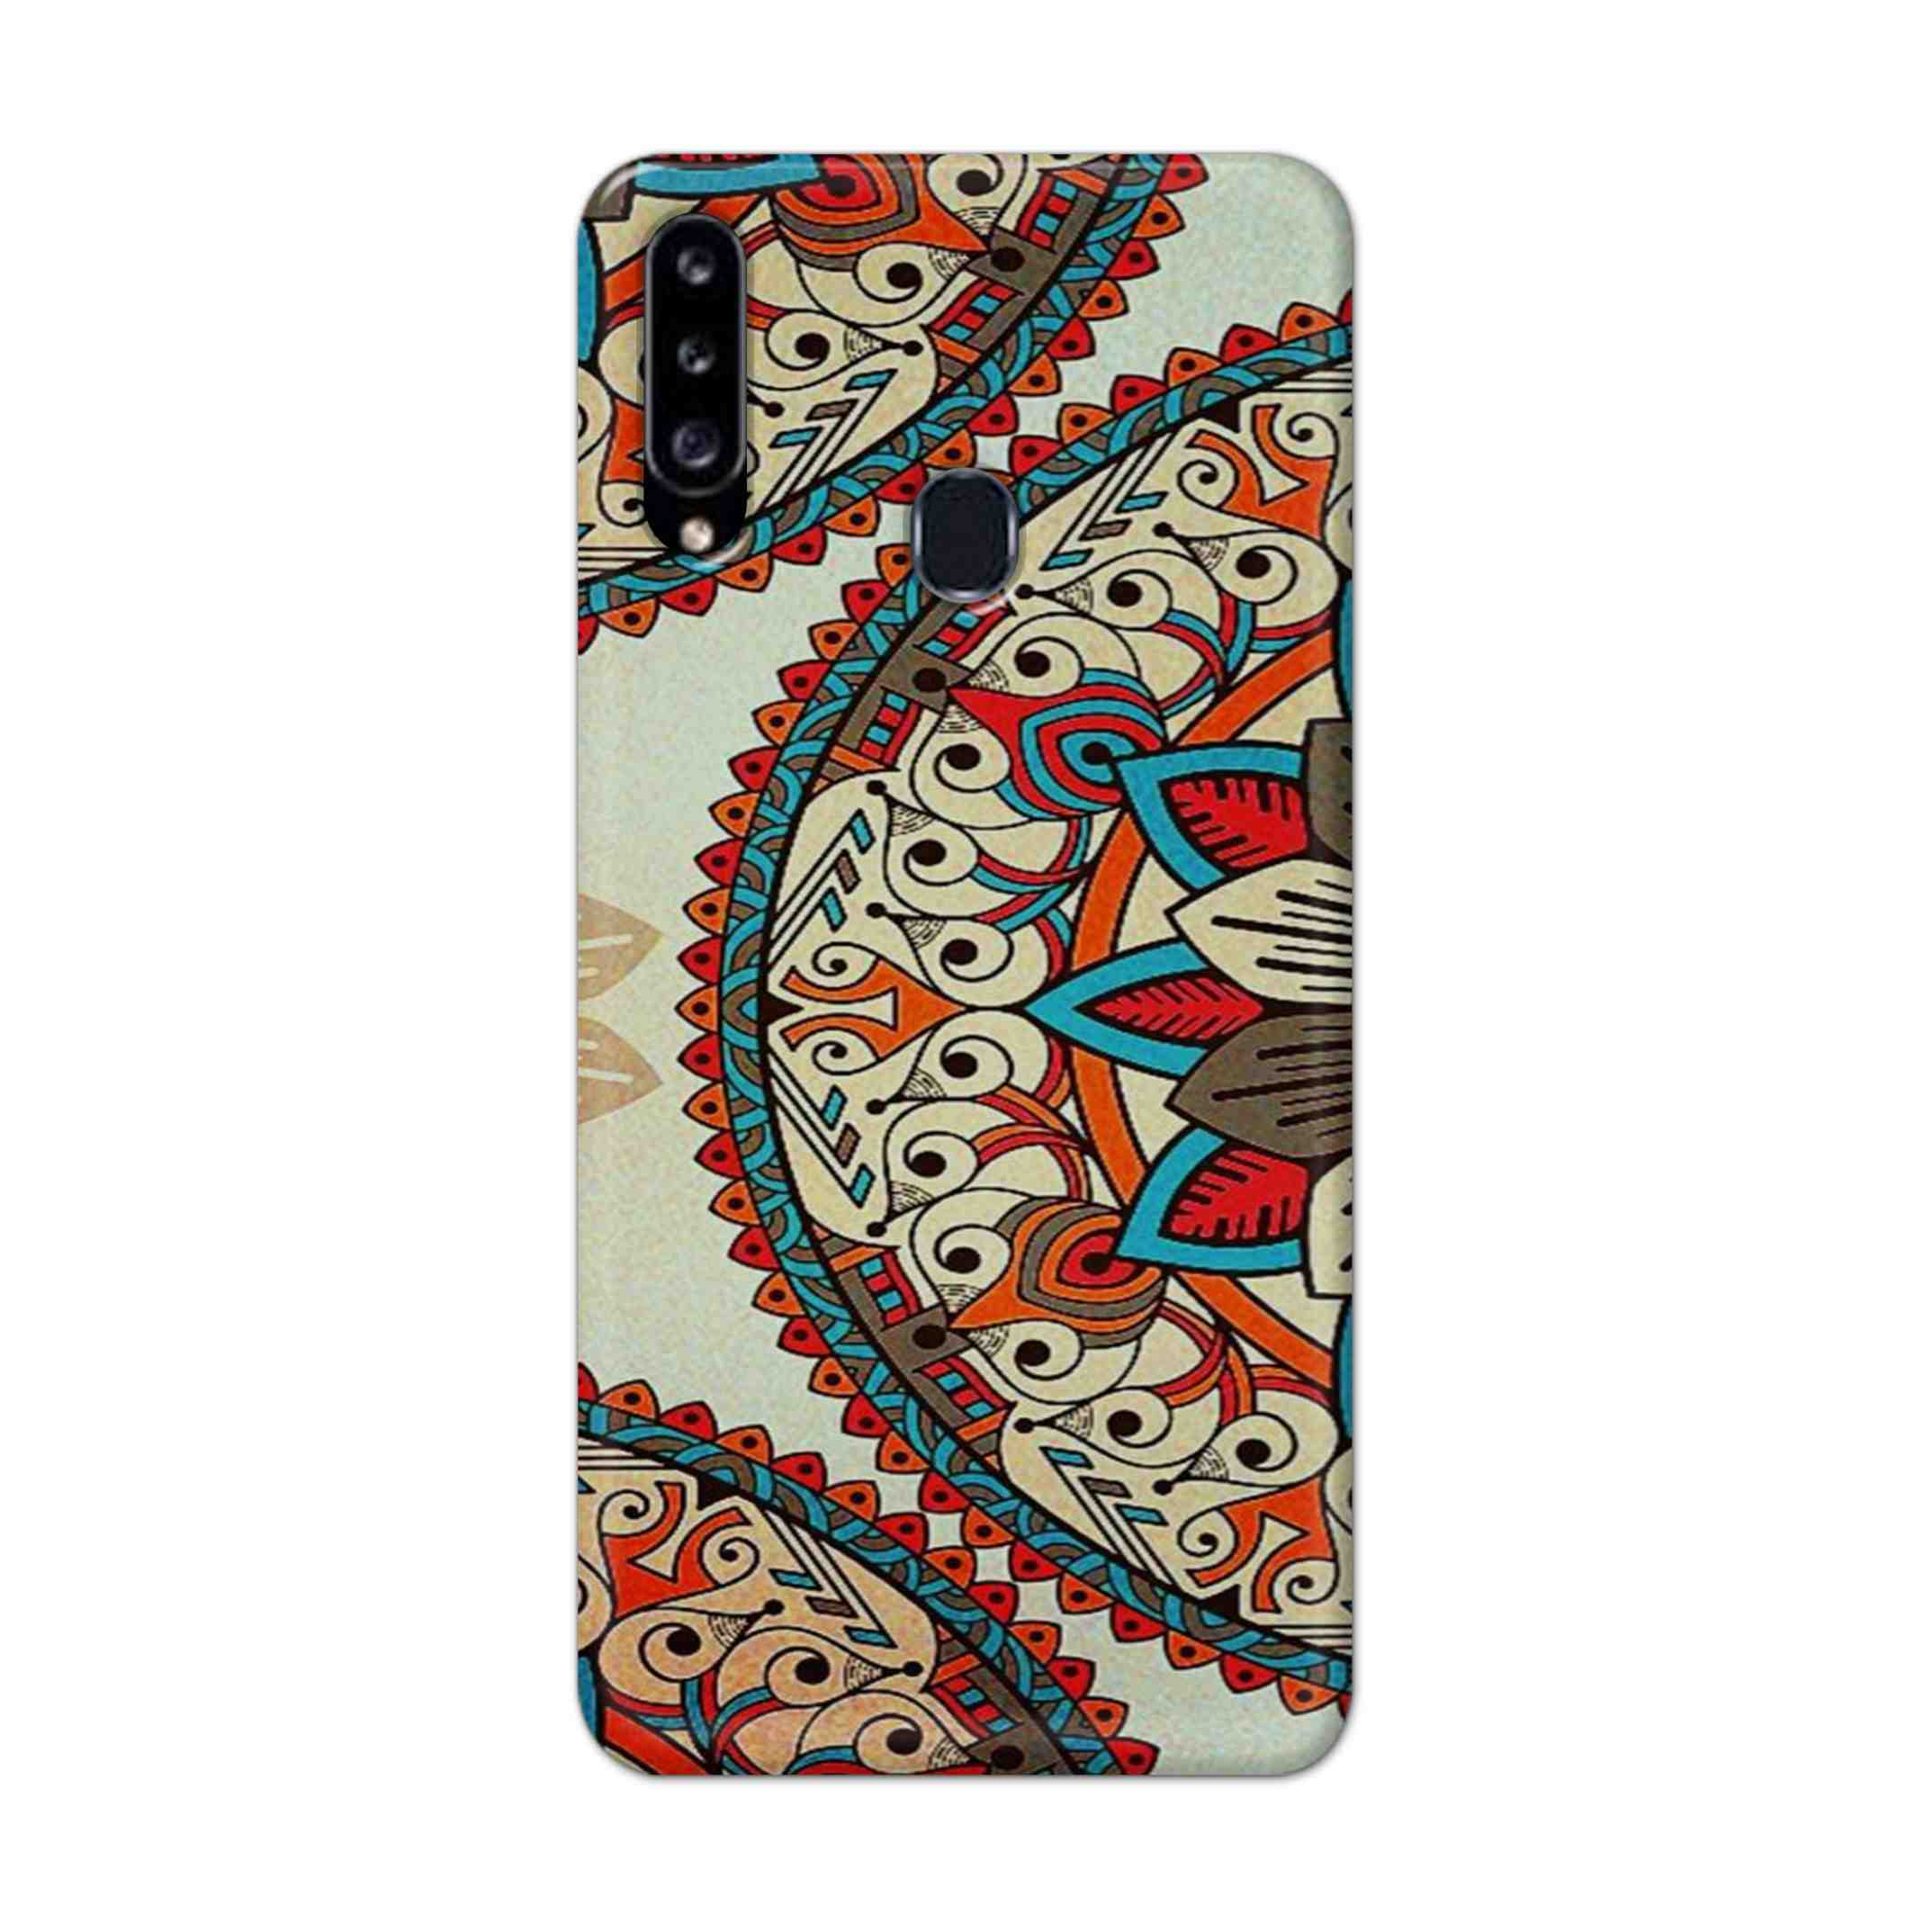 Buy Aztec Mandalas Hard Back Mobile Phone Case Cover For Samsung Galaxy A21 Online